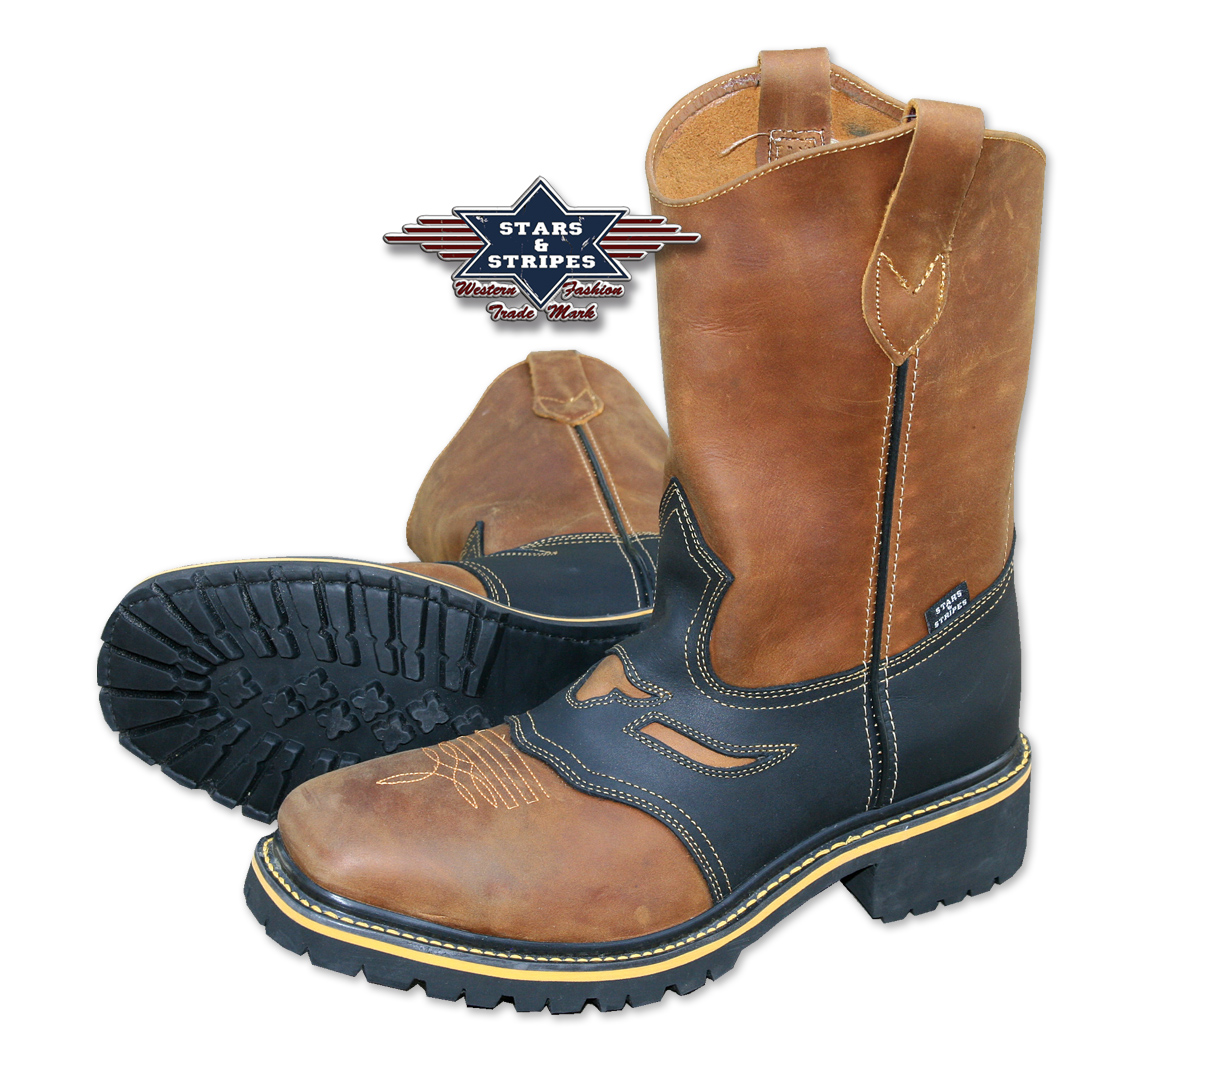 Cowboy boots with steel toe cap